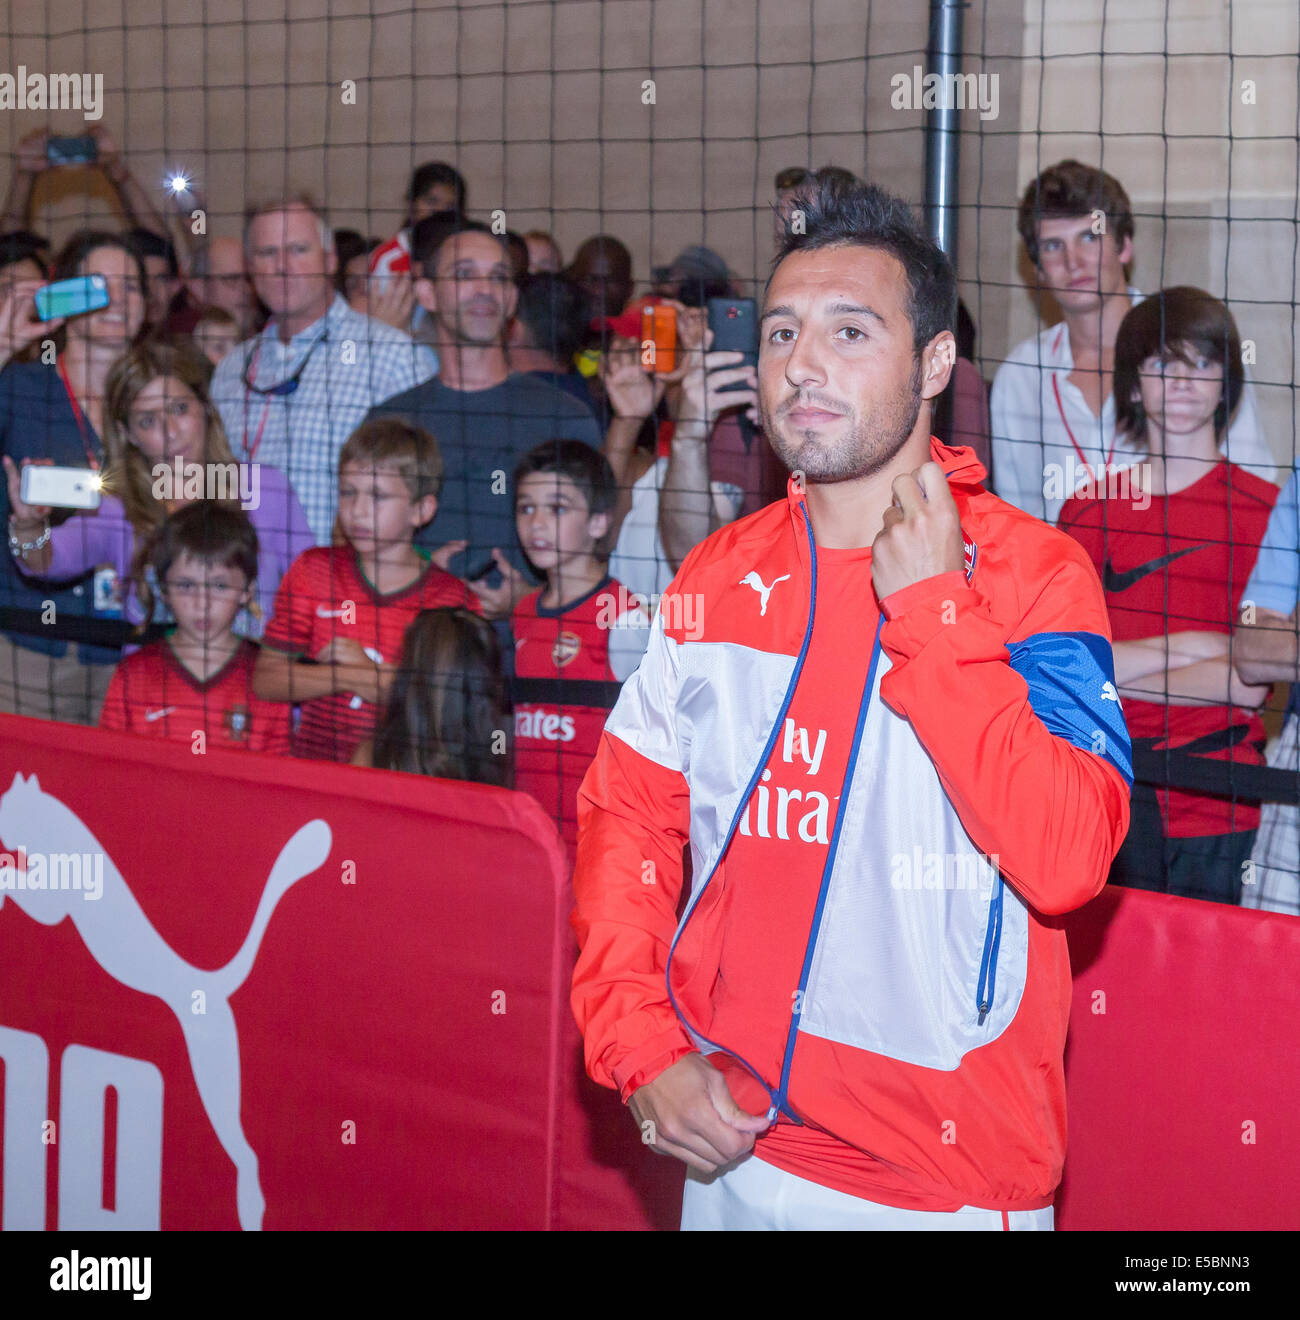 New York, NY, USA - July 25, 2014: Arsenal  football player Santi Cazorla attends the PUMA partners with Arsenal Football Club to Debut Monumental Cannon event in Grand Central Station in New York City. Credit:  Sam Aronov/Alamy Live News Stock Photo